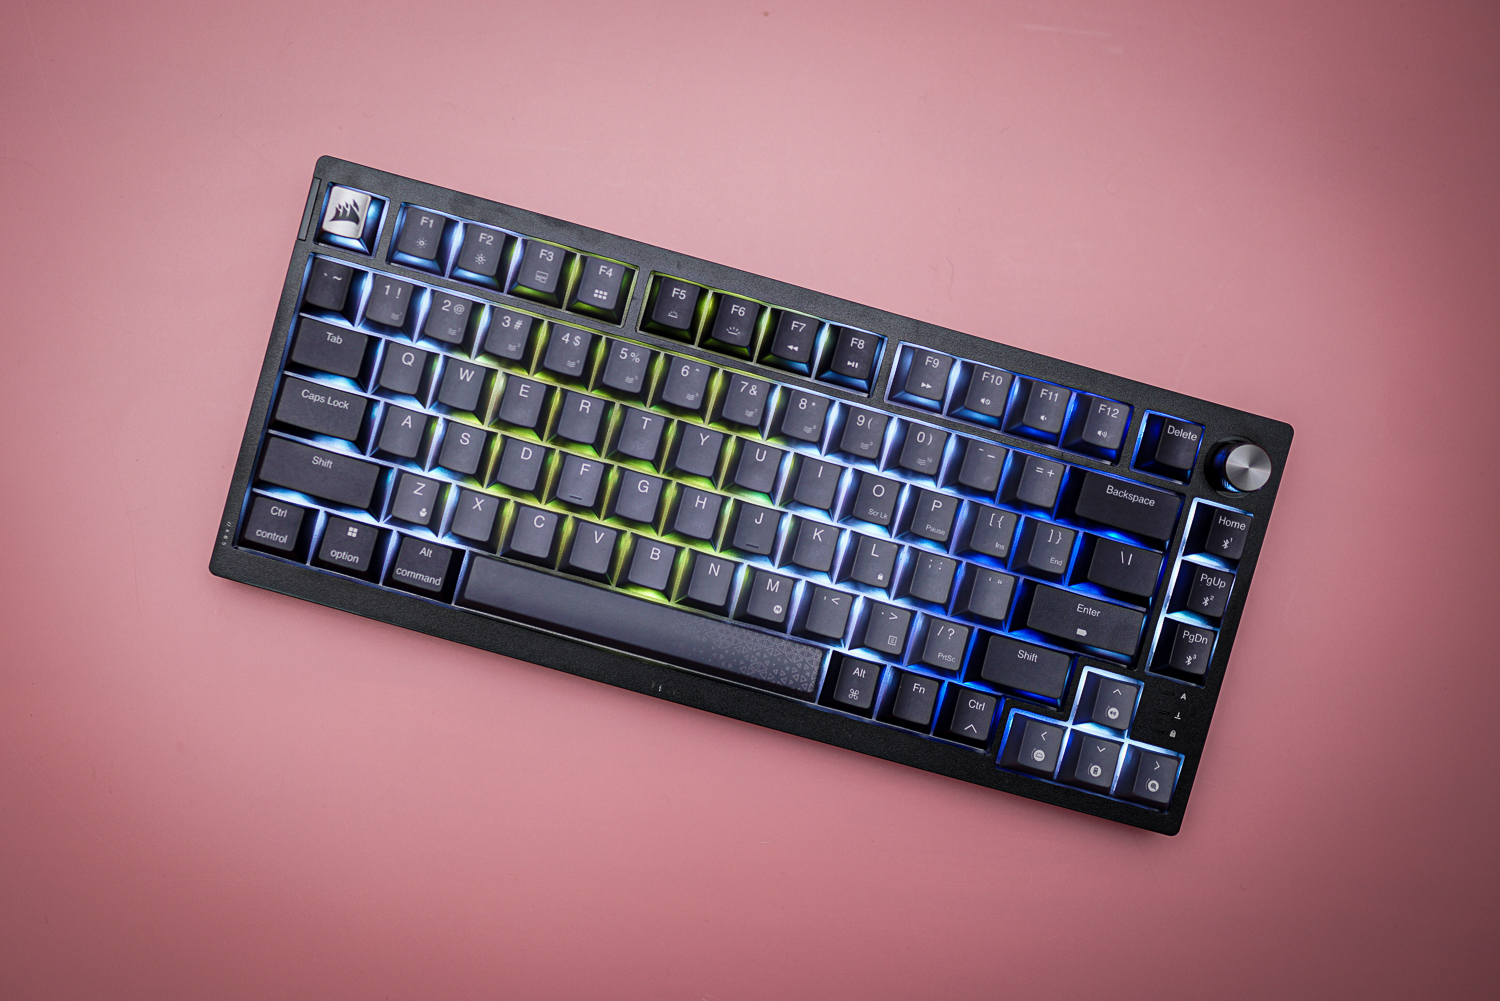 The Corsair K65 Plus Wireless keyboard on a pink background.